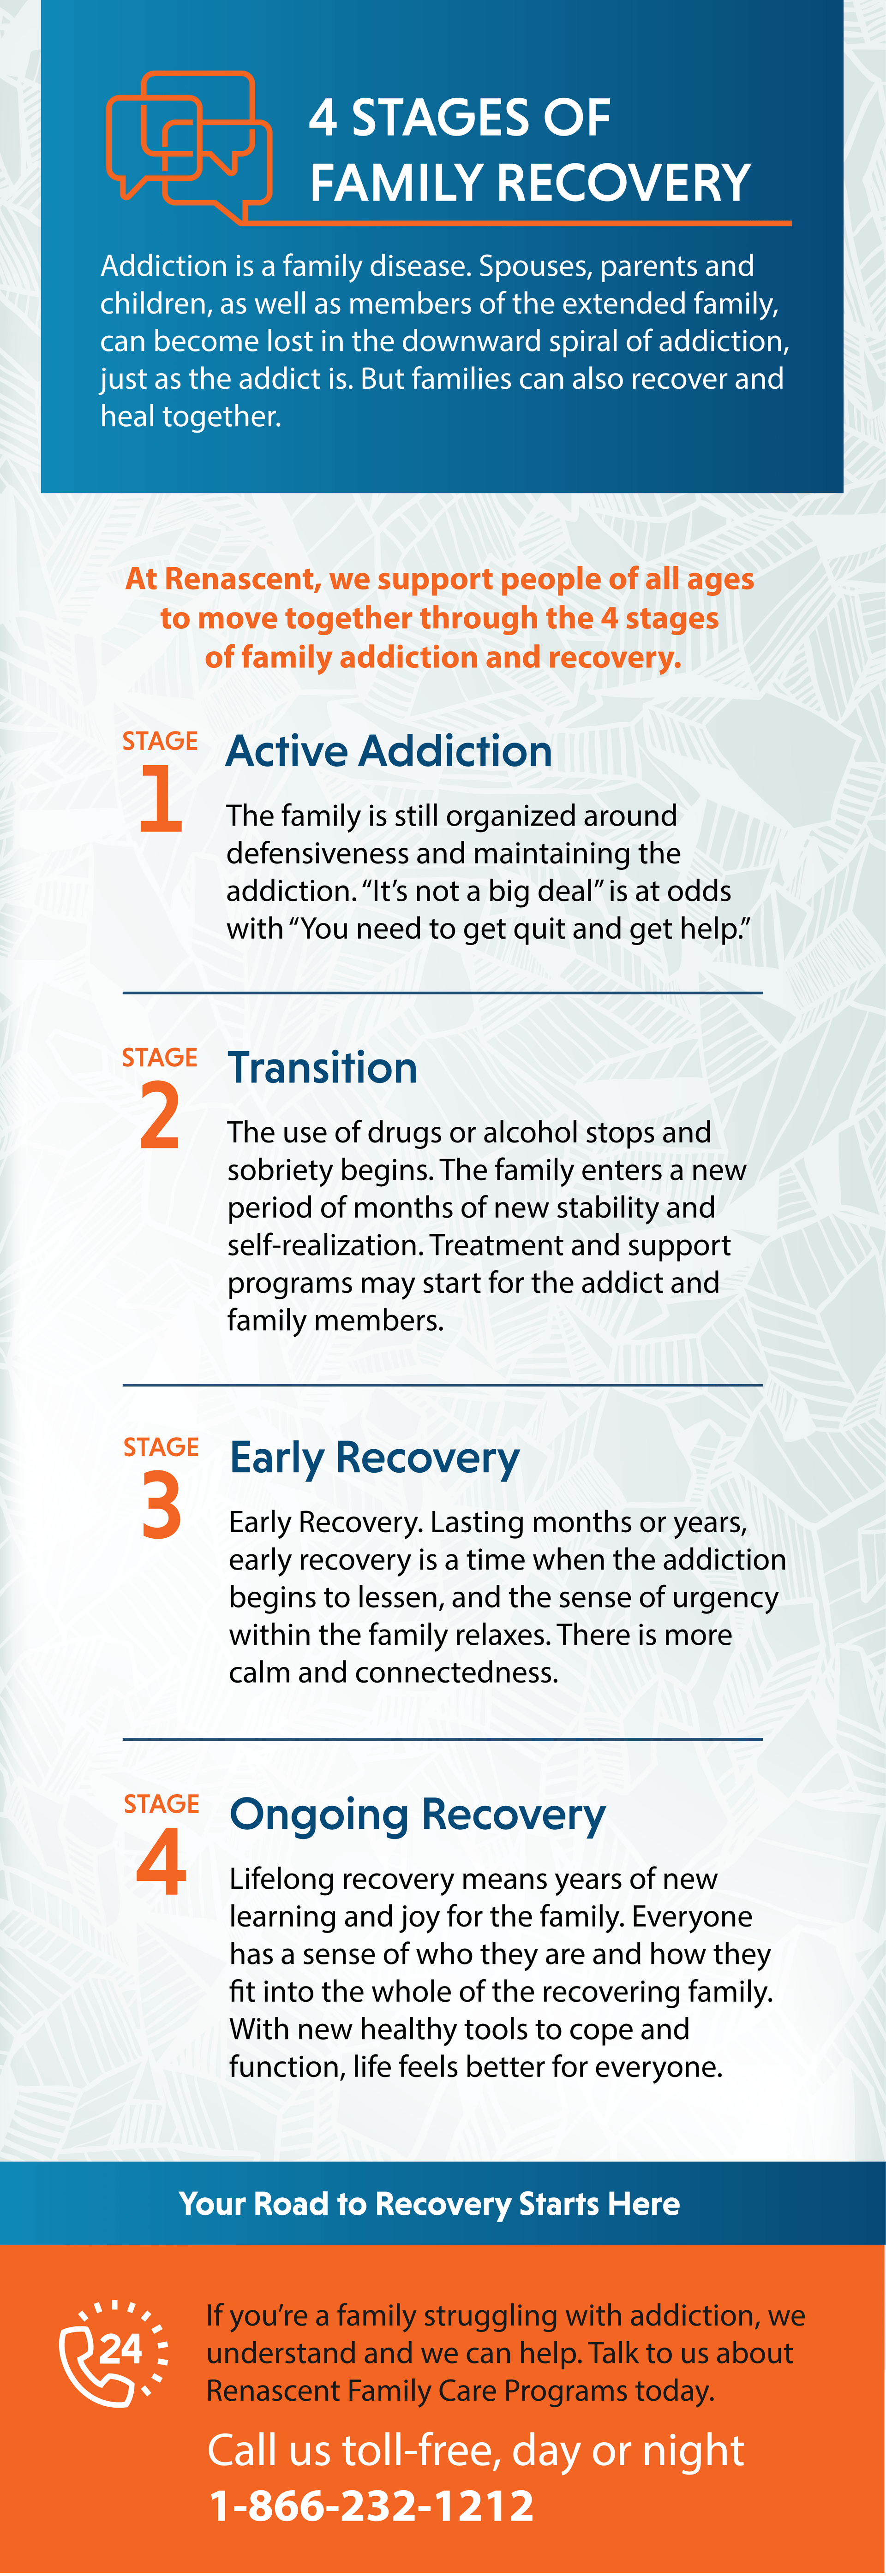 4 stages of family recovery pamphlet.